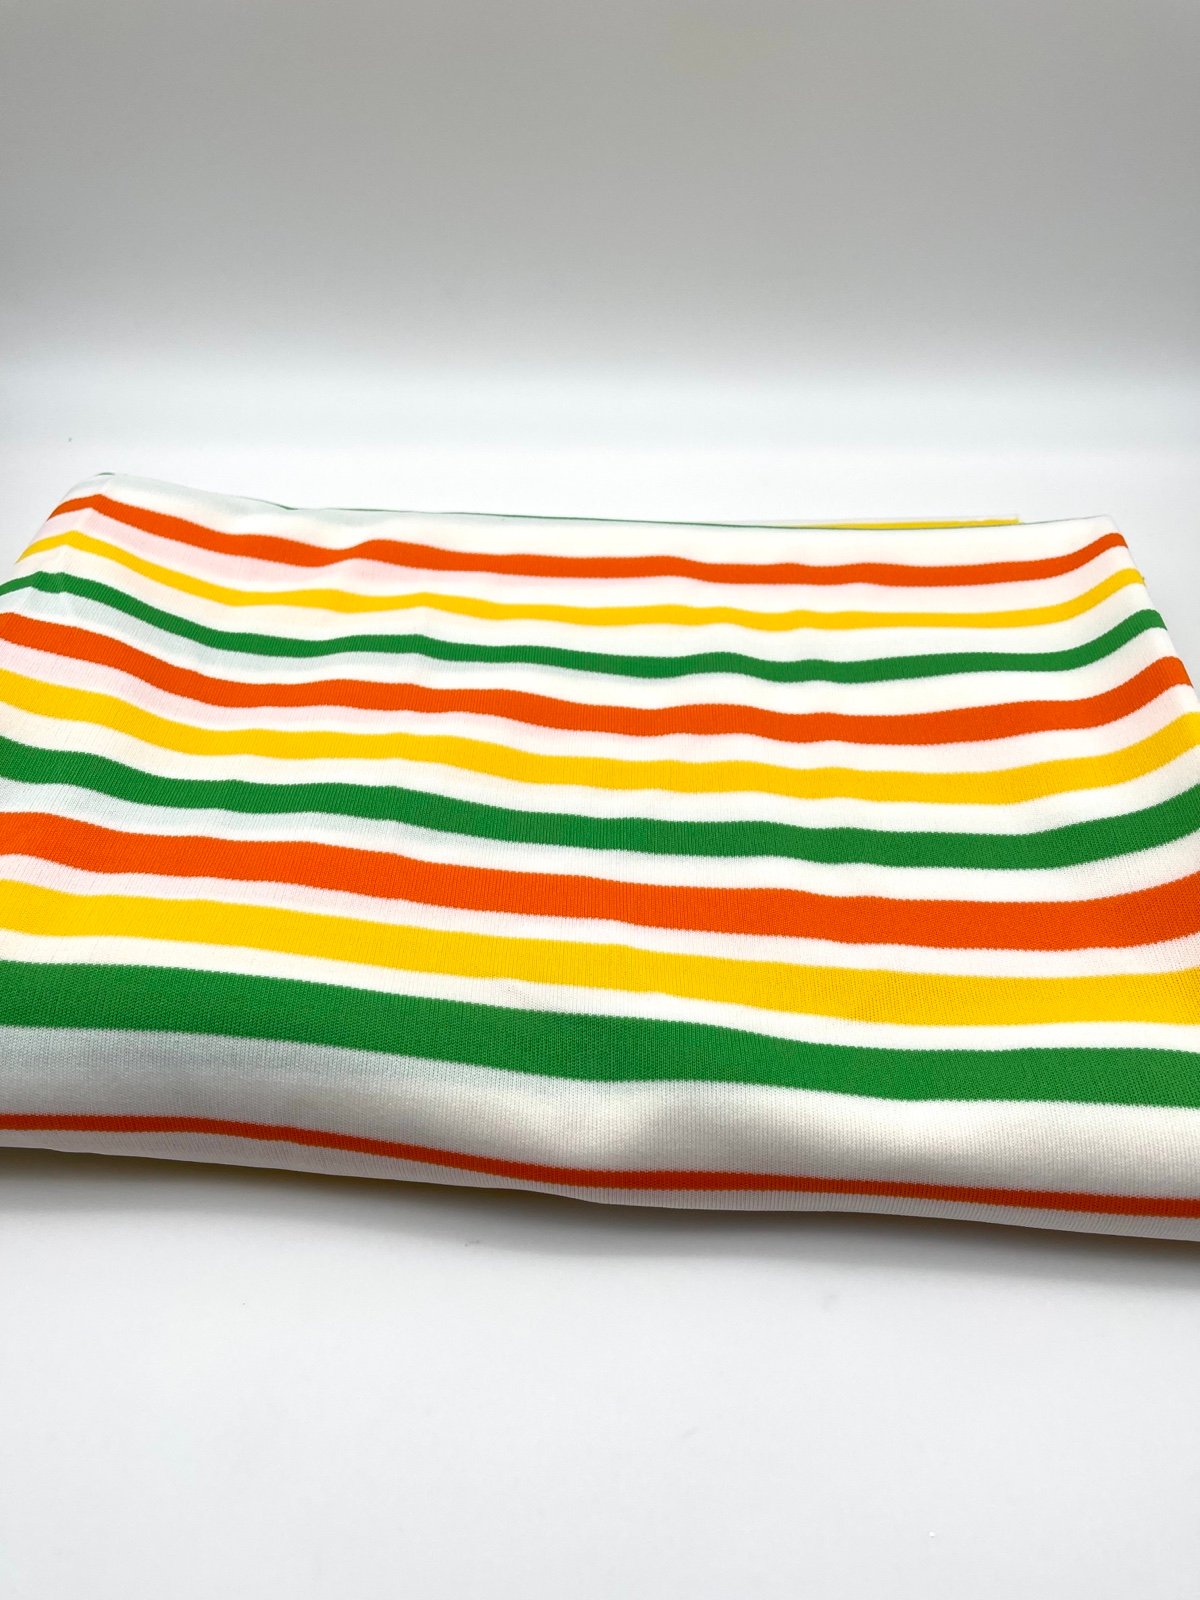 Vintage Fabric Striped Jersey Knit, Citrus Colors Yellow Green 1970’s I 3n4FCodnk